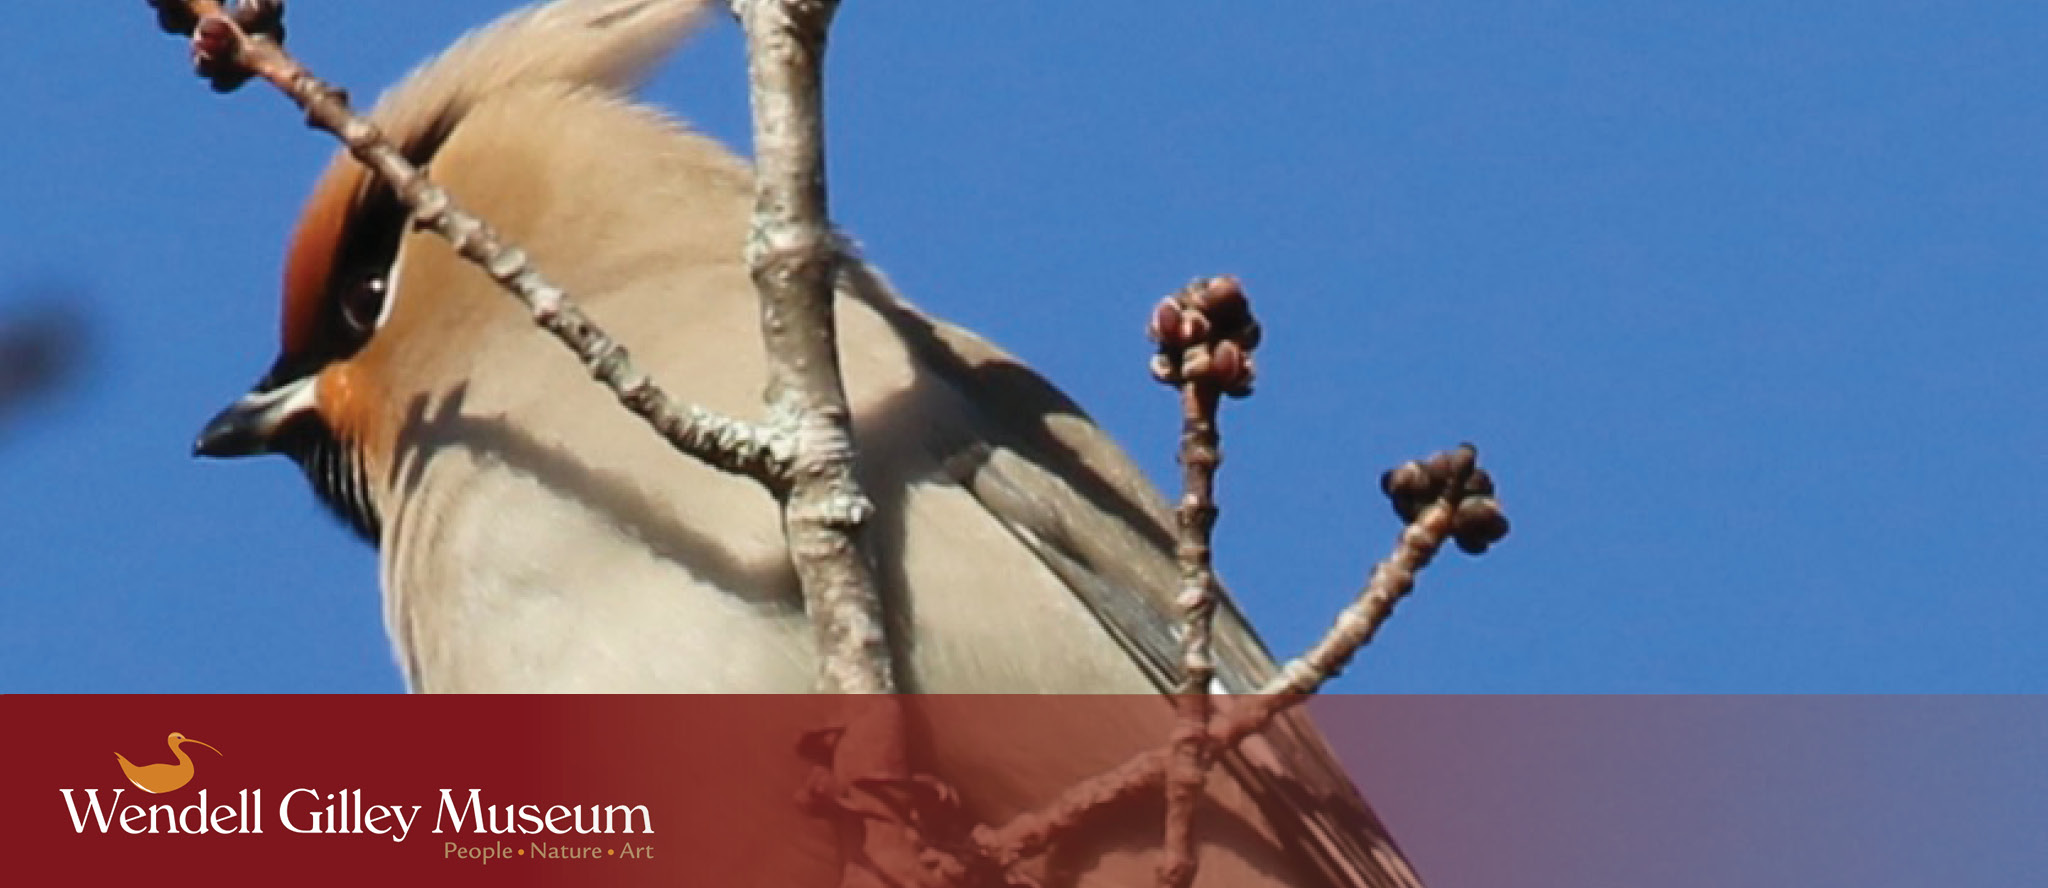 A Bohemian waxwing perches on a tree branch against a bright blue sky.